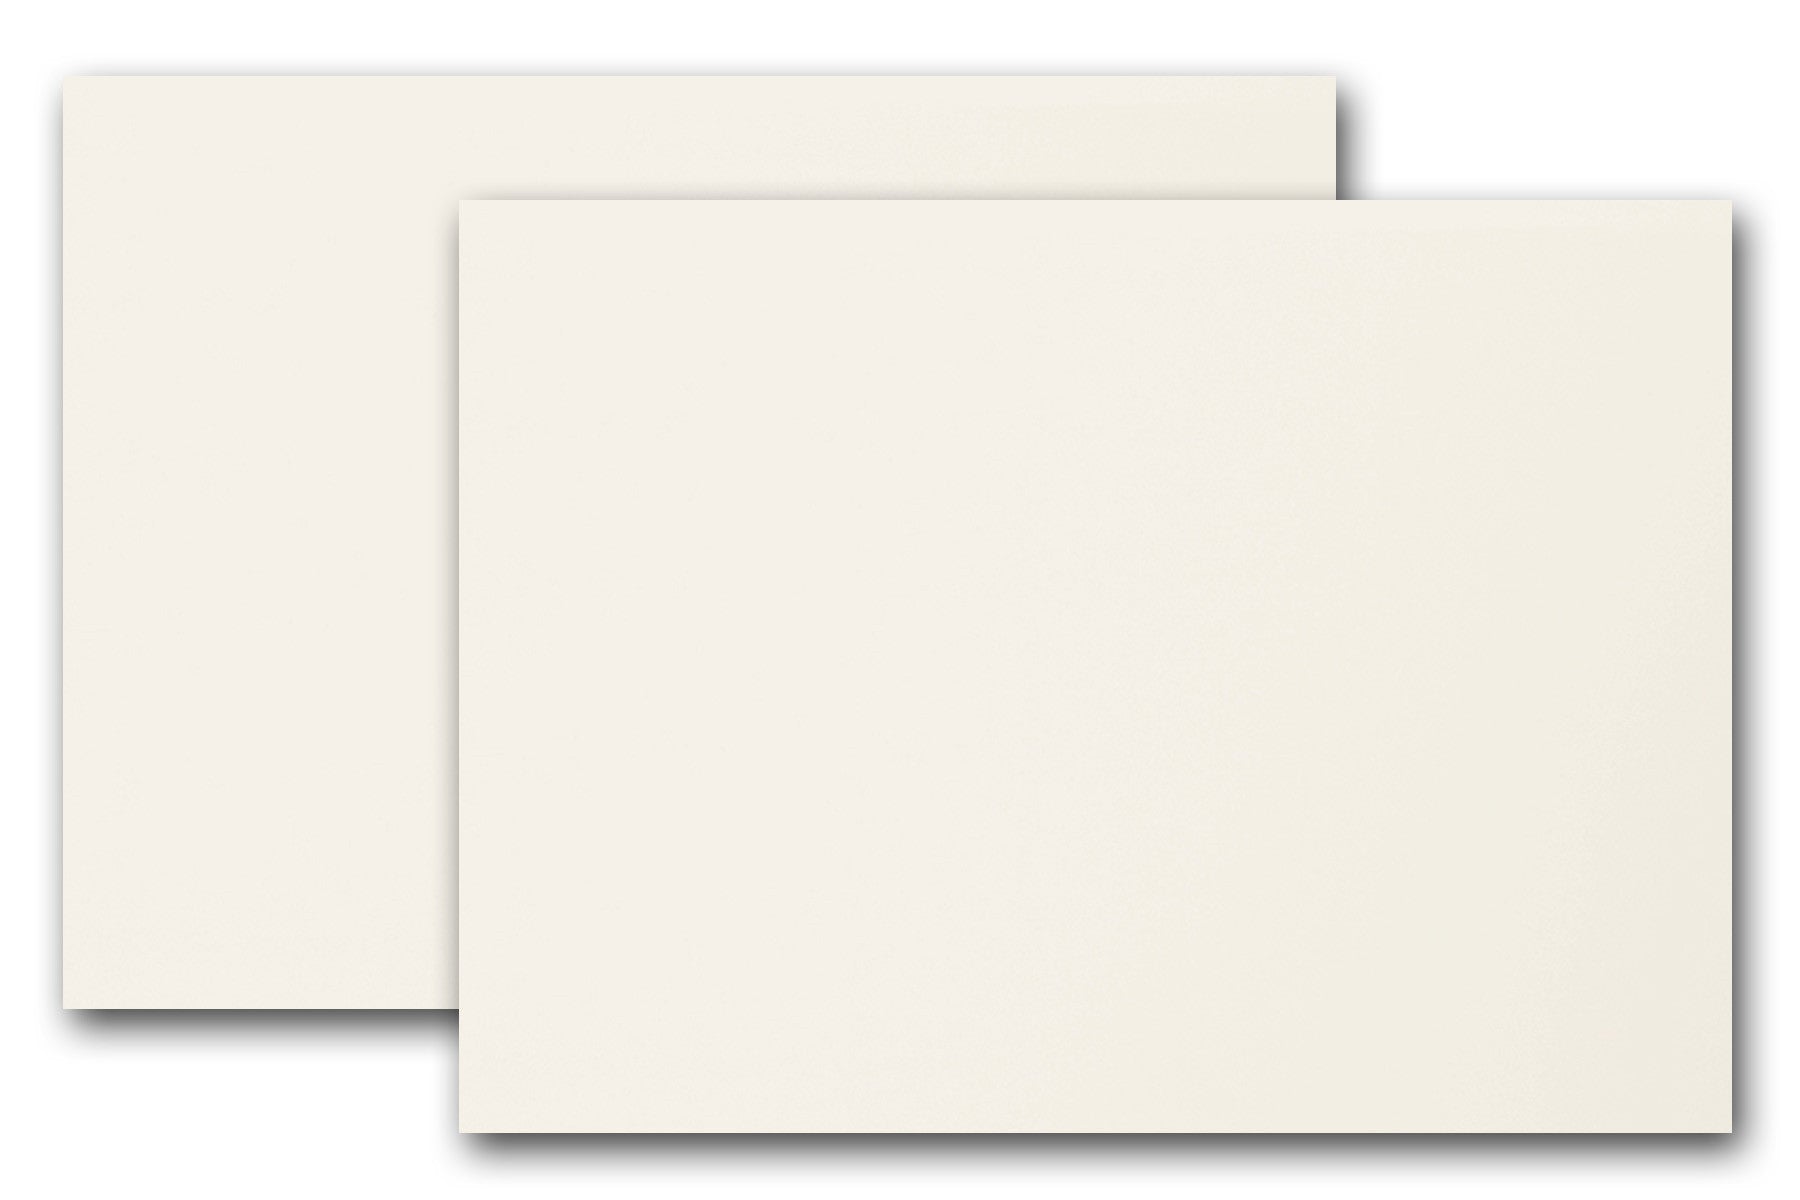 White card Stock Photos, Royalty Free White card Images